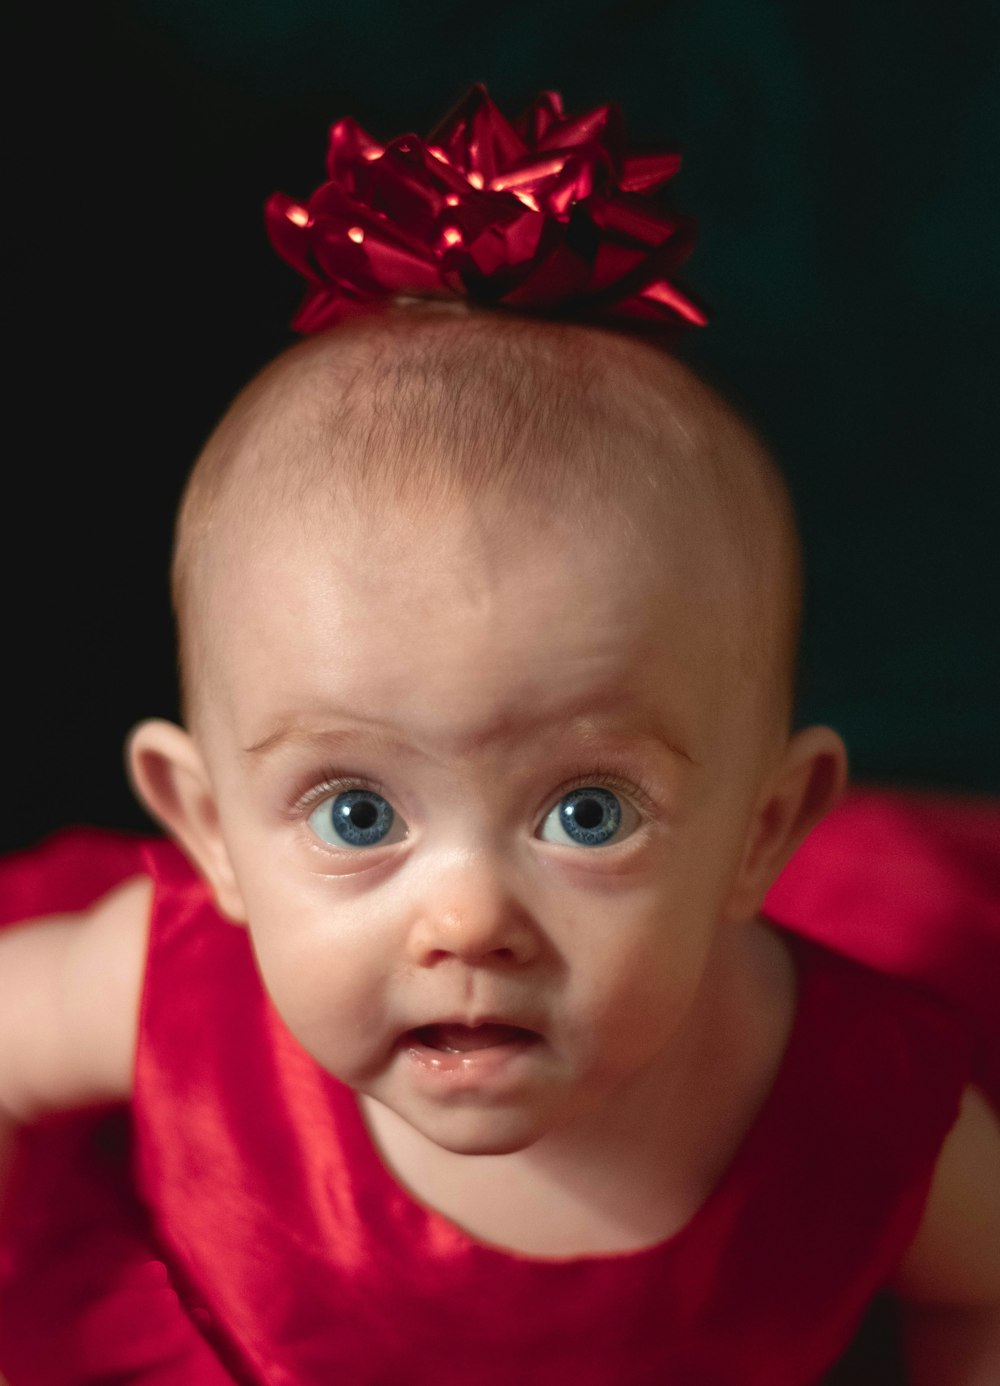 selective focus photography of girl wearing red dress looking up